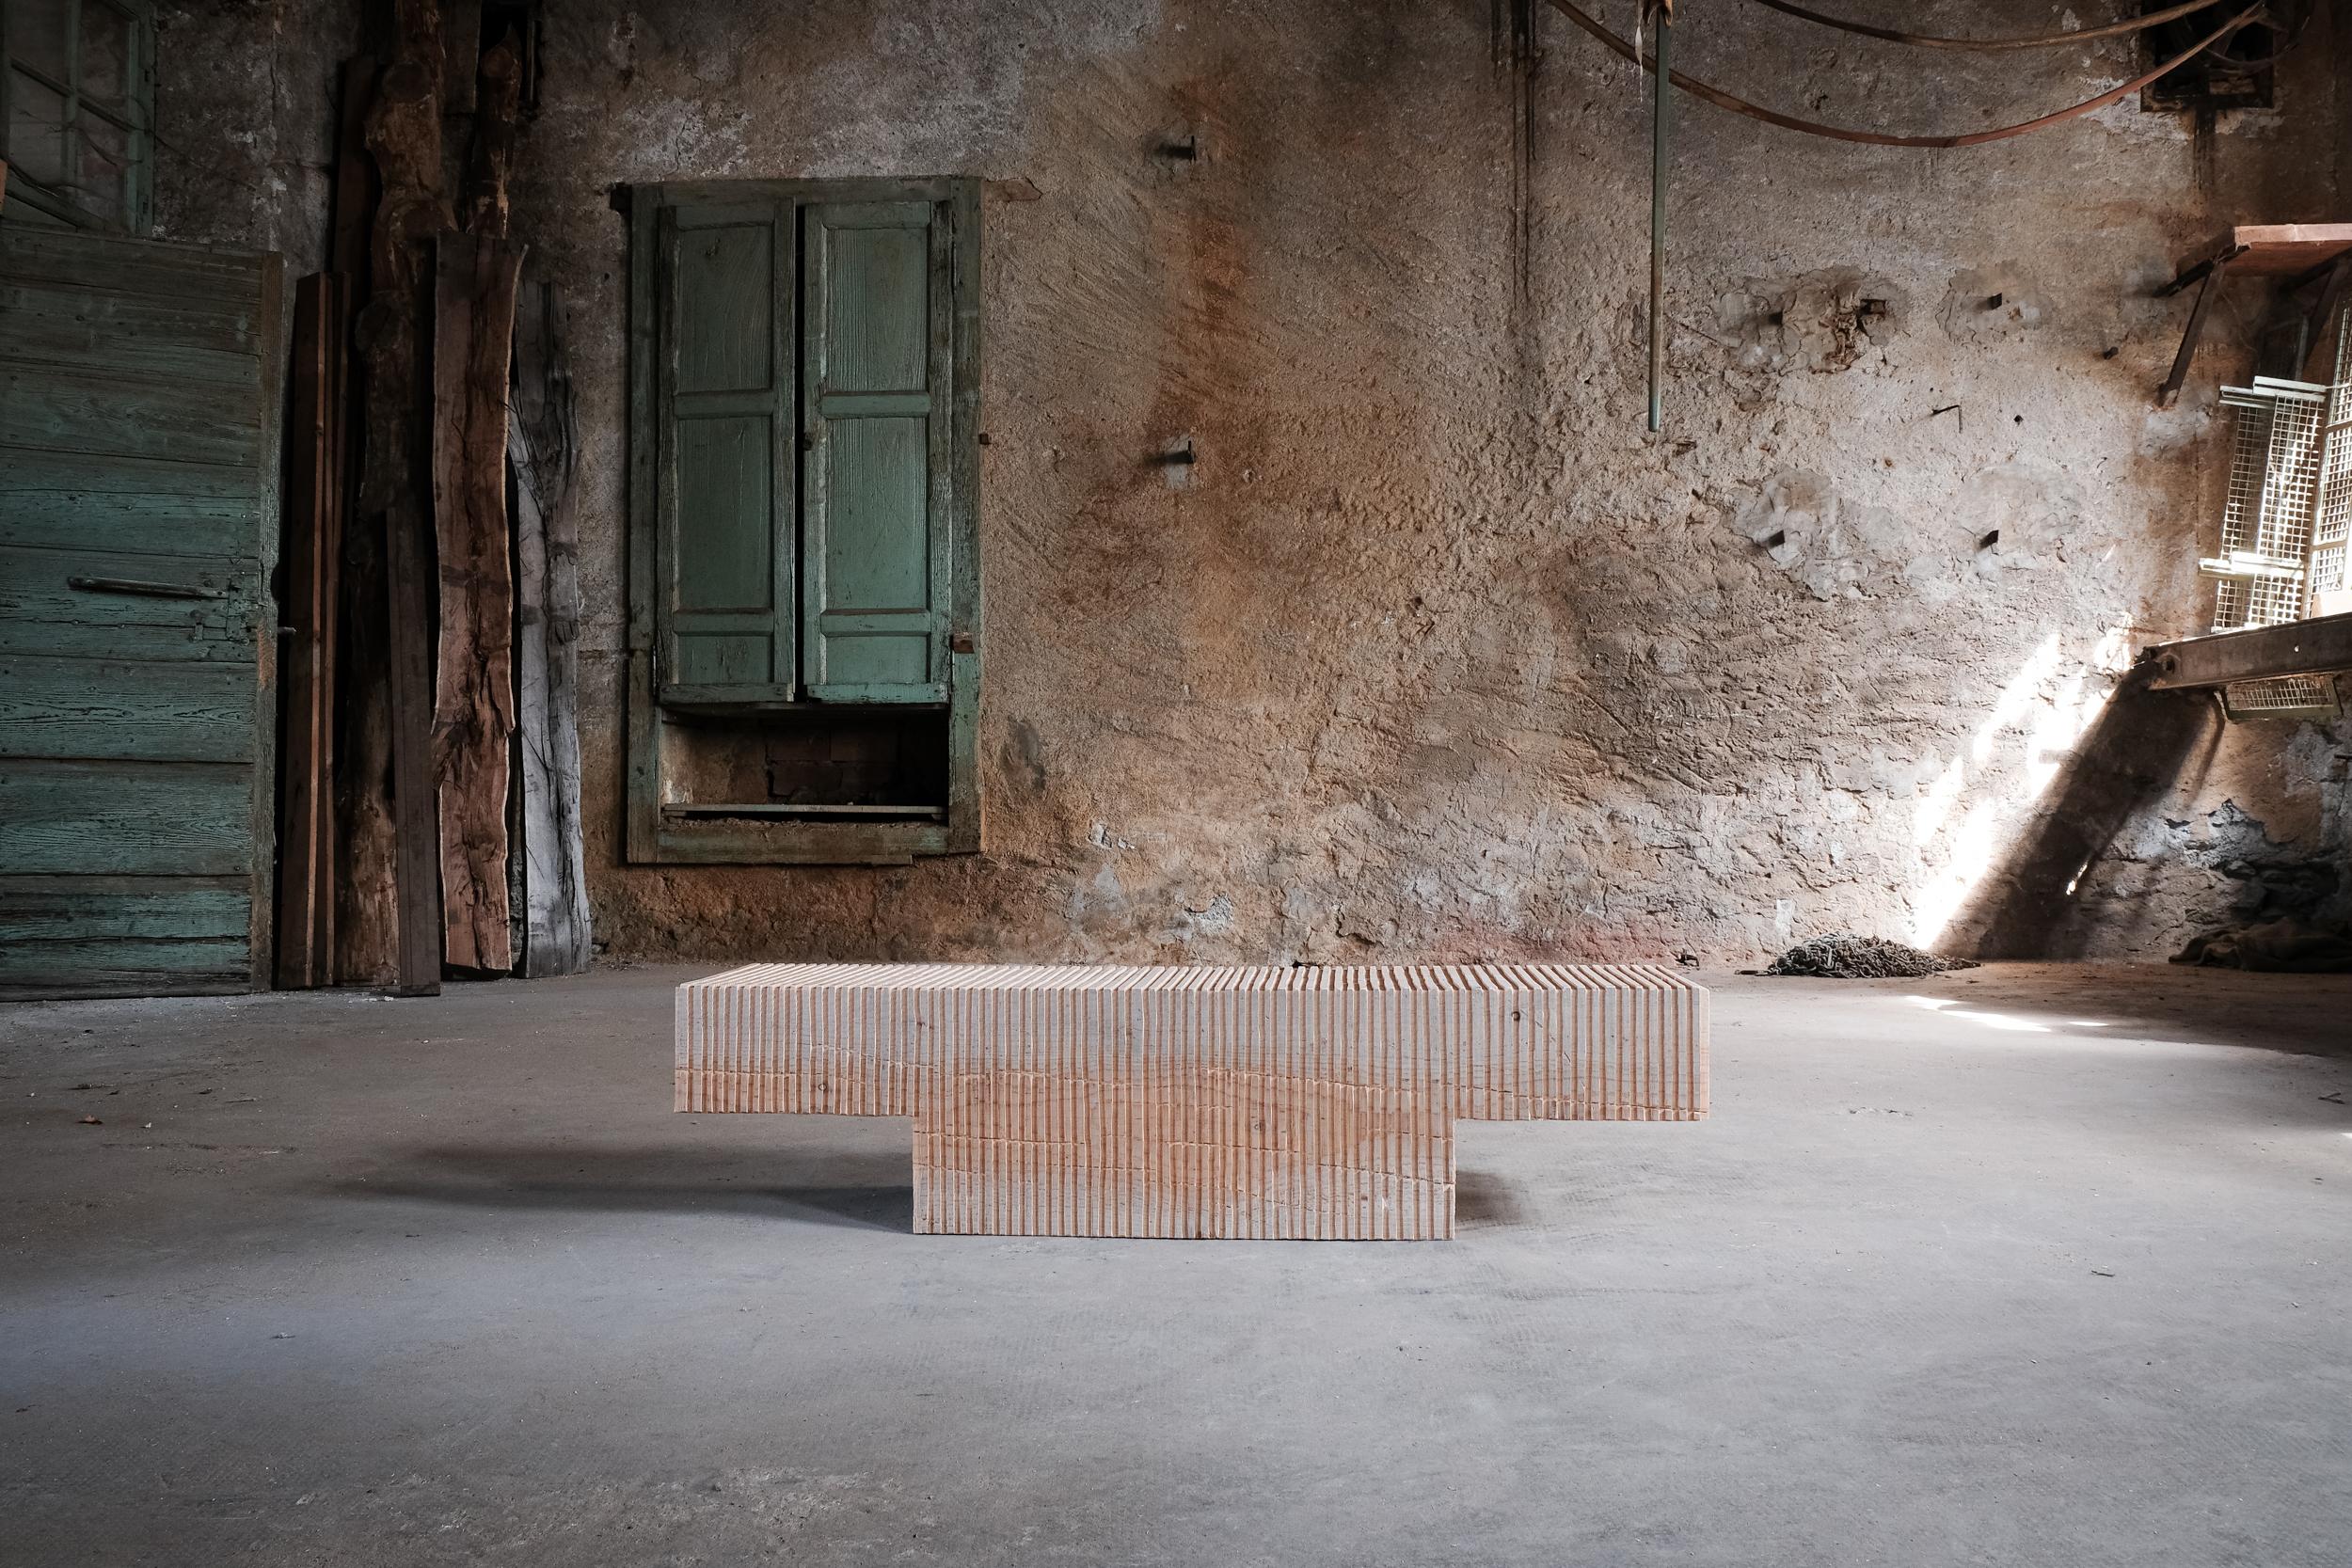 The 'Galtur Bench' by Italian designer-maker Riccardo Monte is a low bench made of cedar that is ideal as a hallway addition, coffee table or bedroom bench. Each one is made to order and is therefore Unique. Inspired by the regional tradition of the